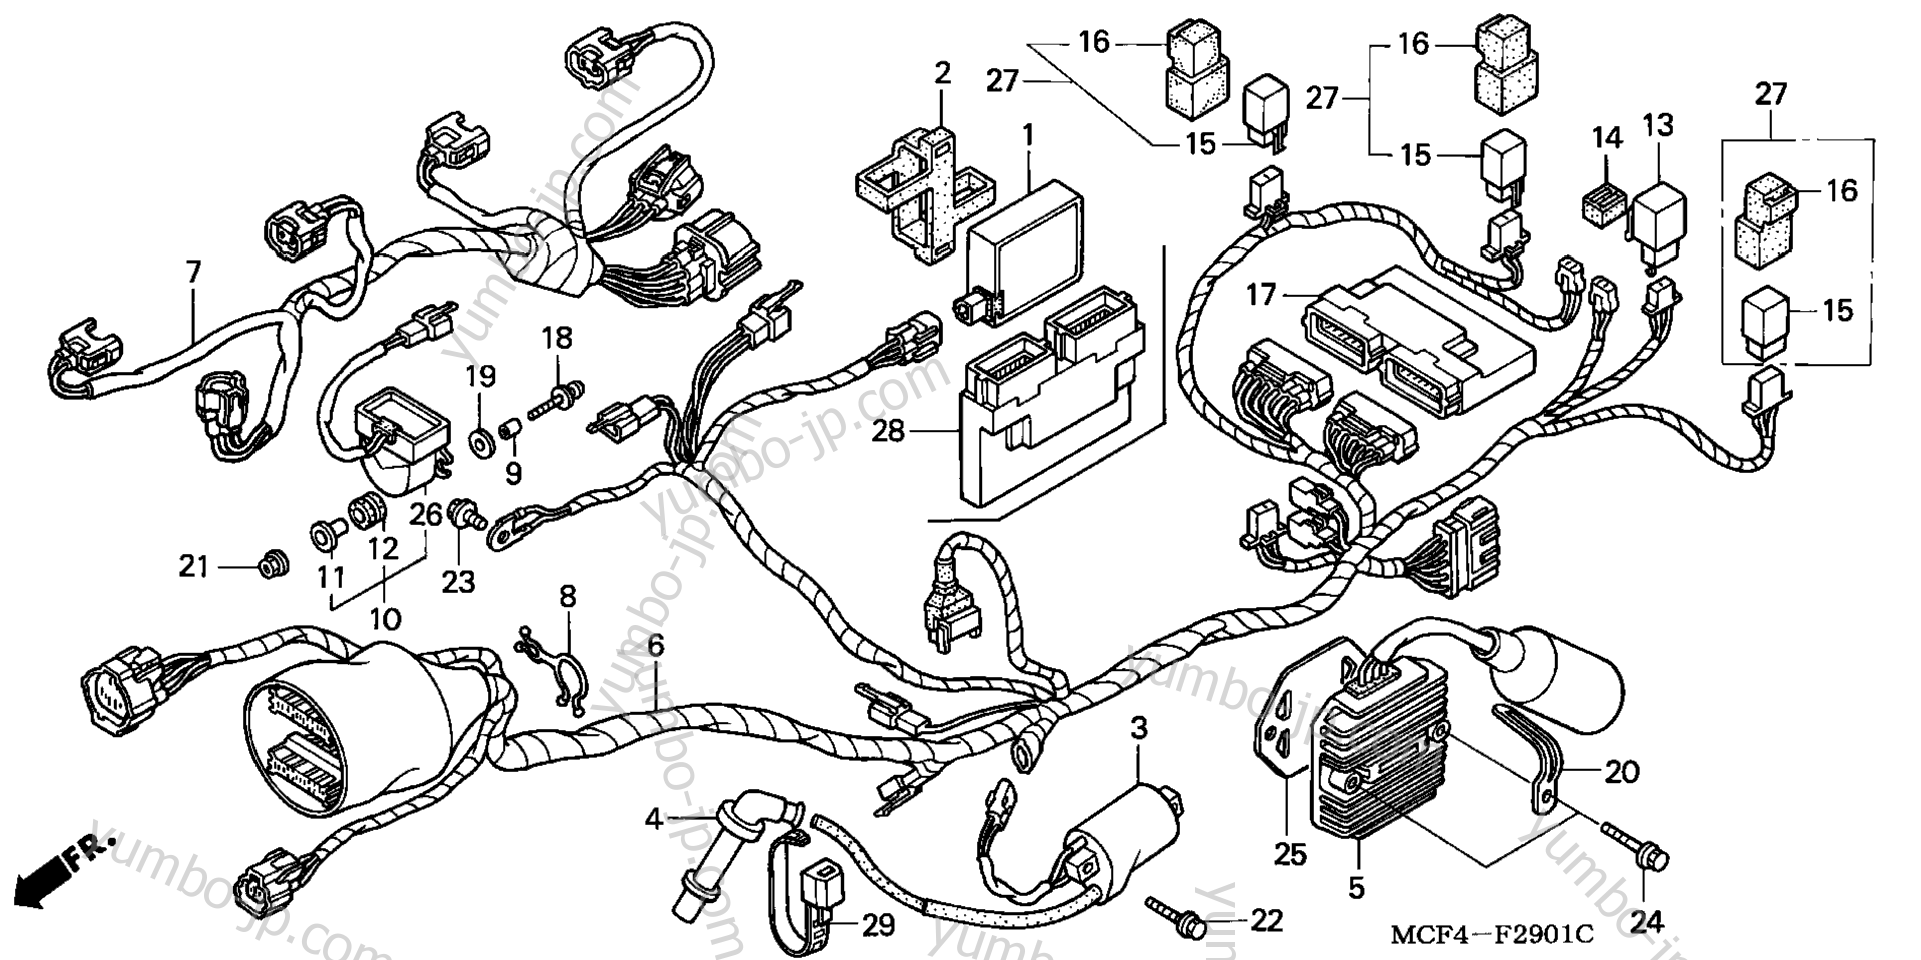 WIRE HARNESS (RR.) for motorcycles HONDA RVT1000R A 2002 year